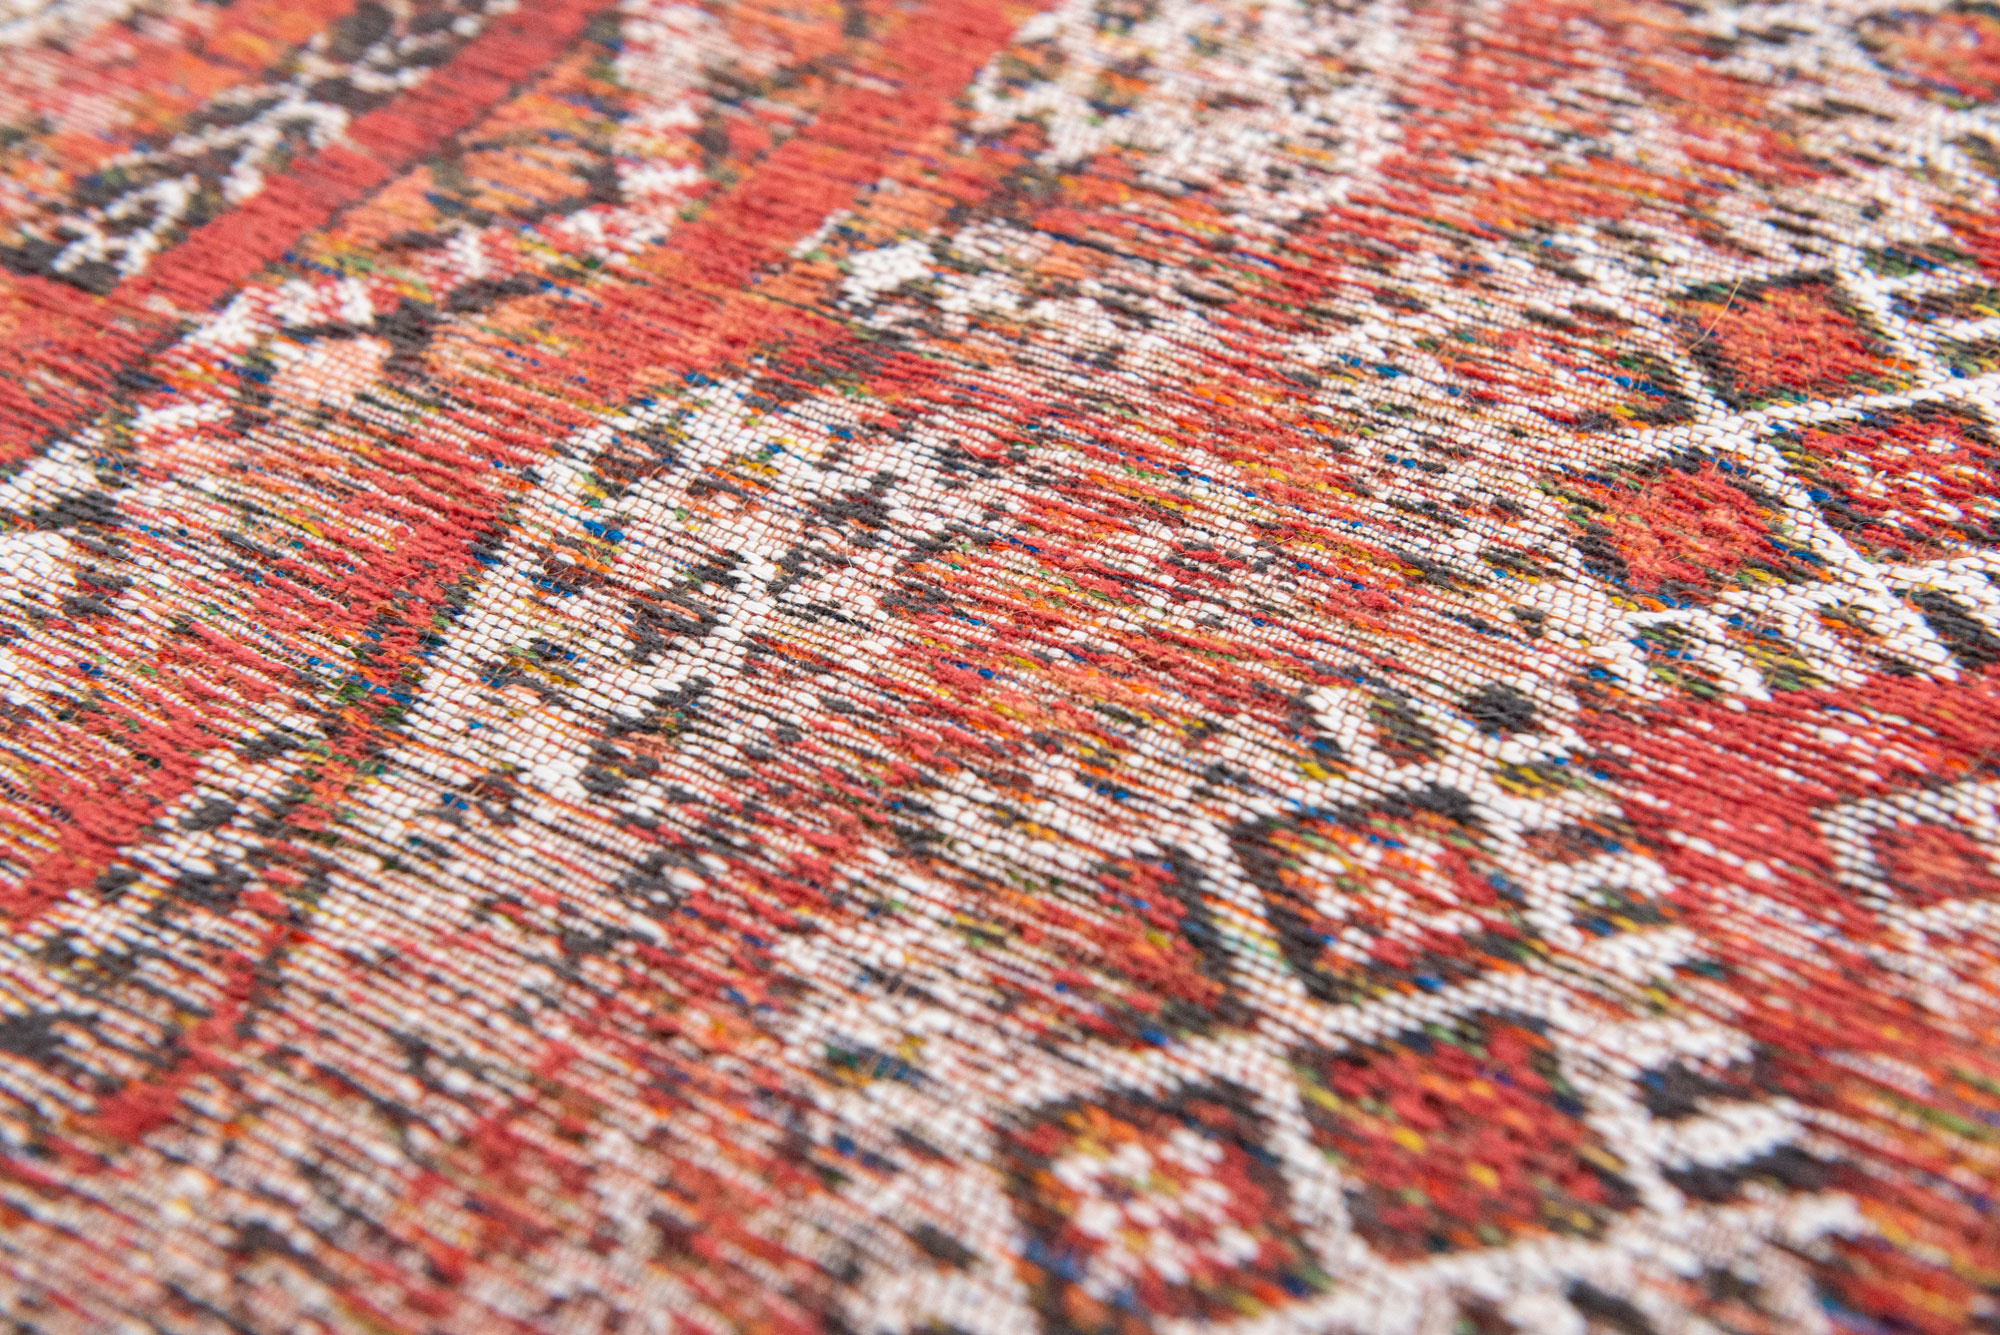 Antiquarian Flatwoven Red Rug ☞ Size: 8' x 11' 2" (240 x 340 cm)